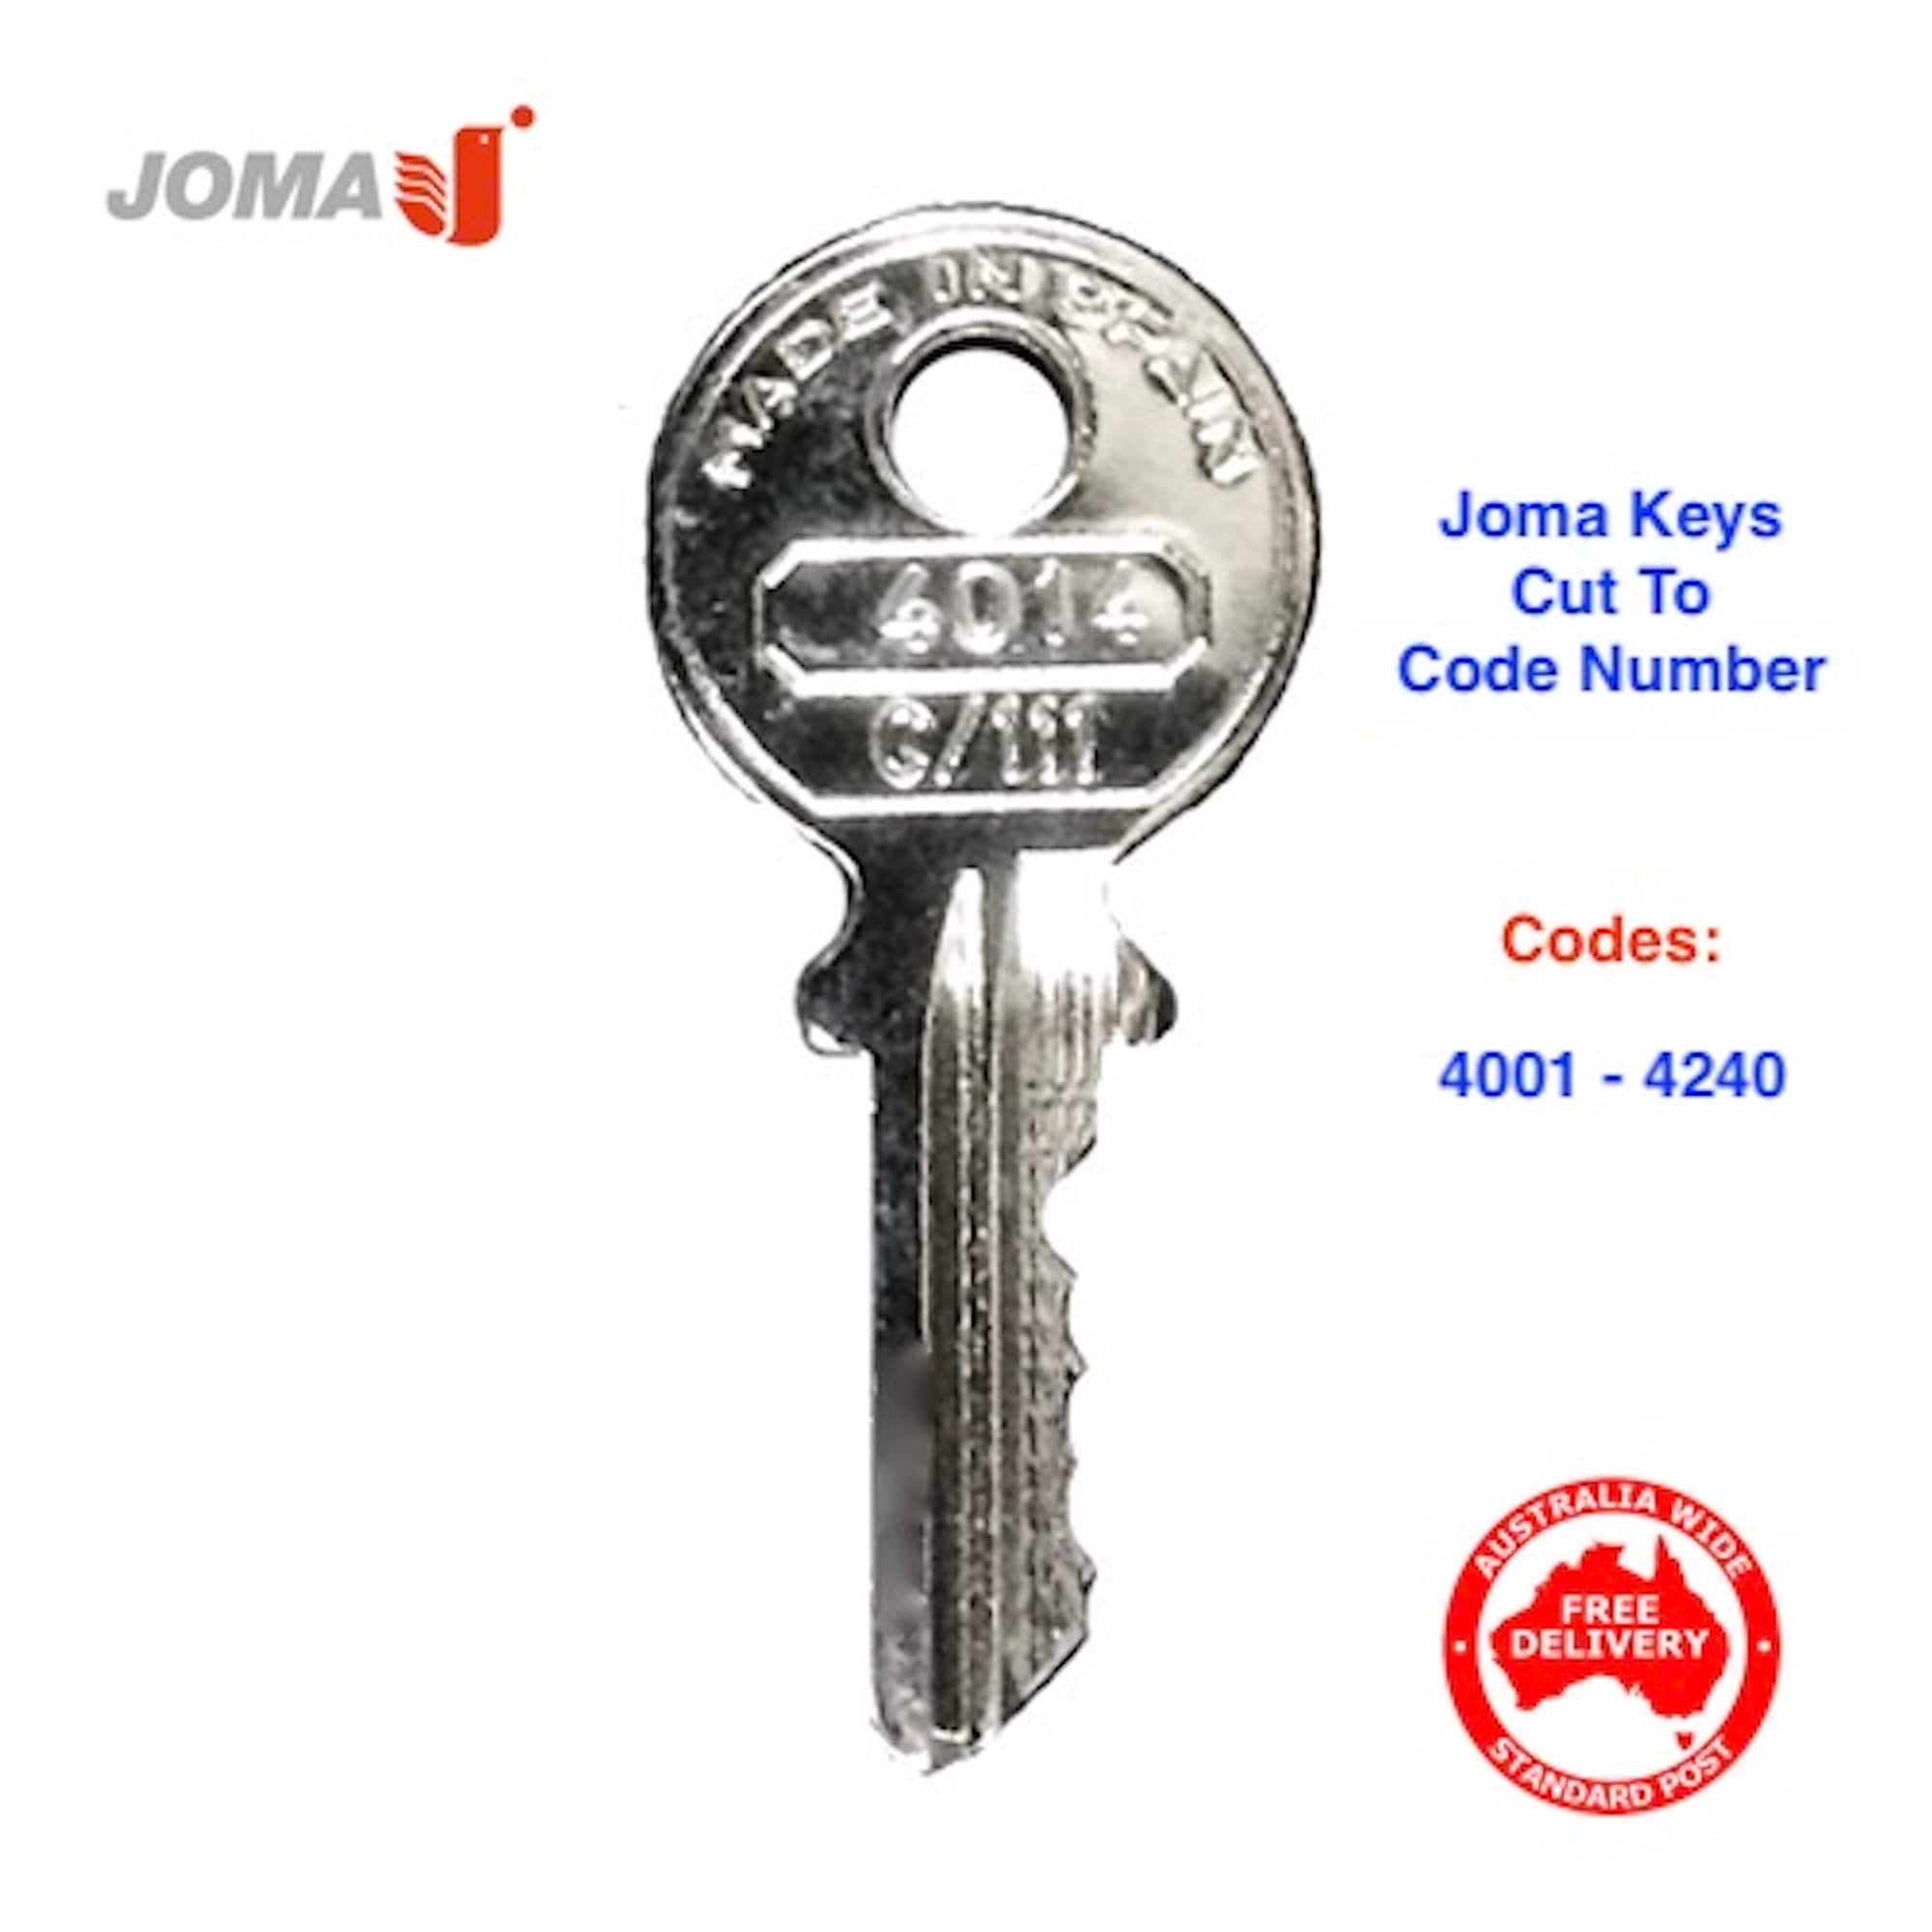 Joma Mail Box & Key Cabinet Keys Cut to Your Code Number - Etsy